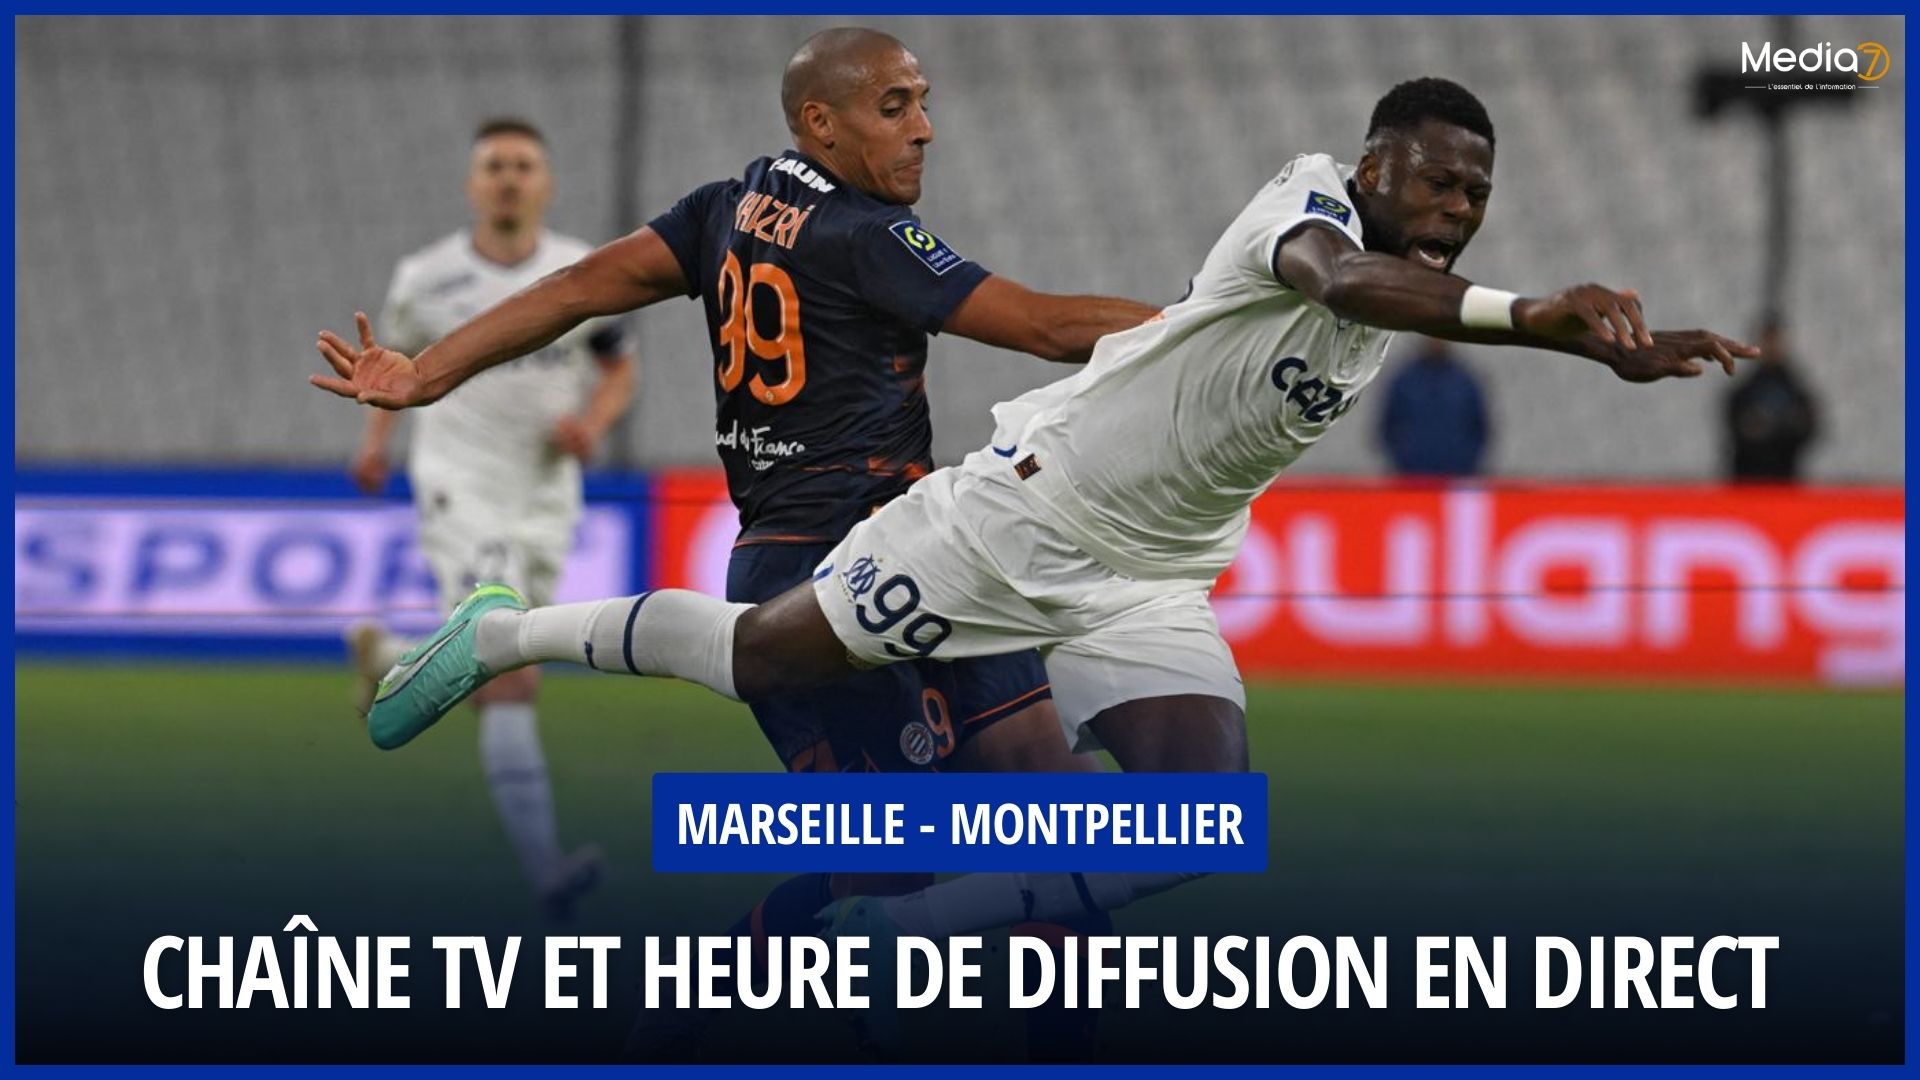 Match Marseille - Montpellier Live: TV Channel and Broadcast Time - Media7